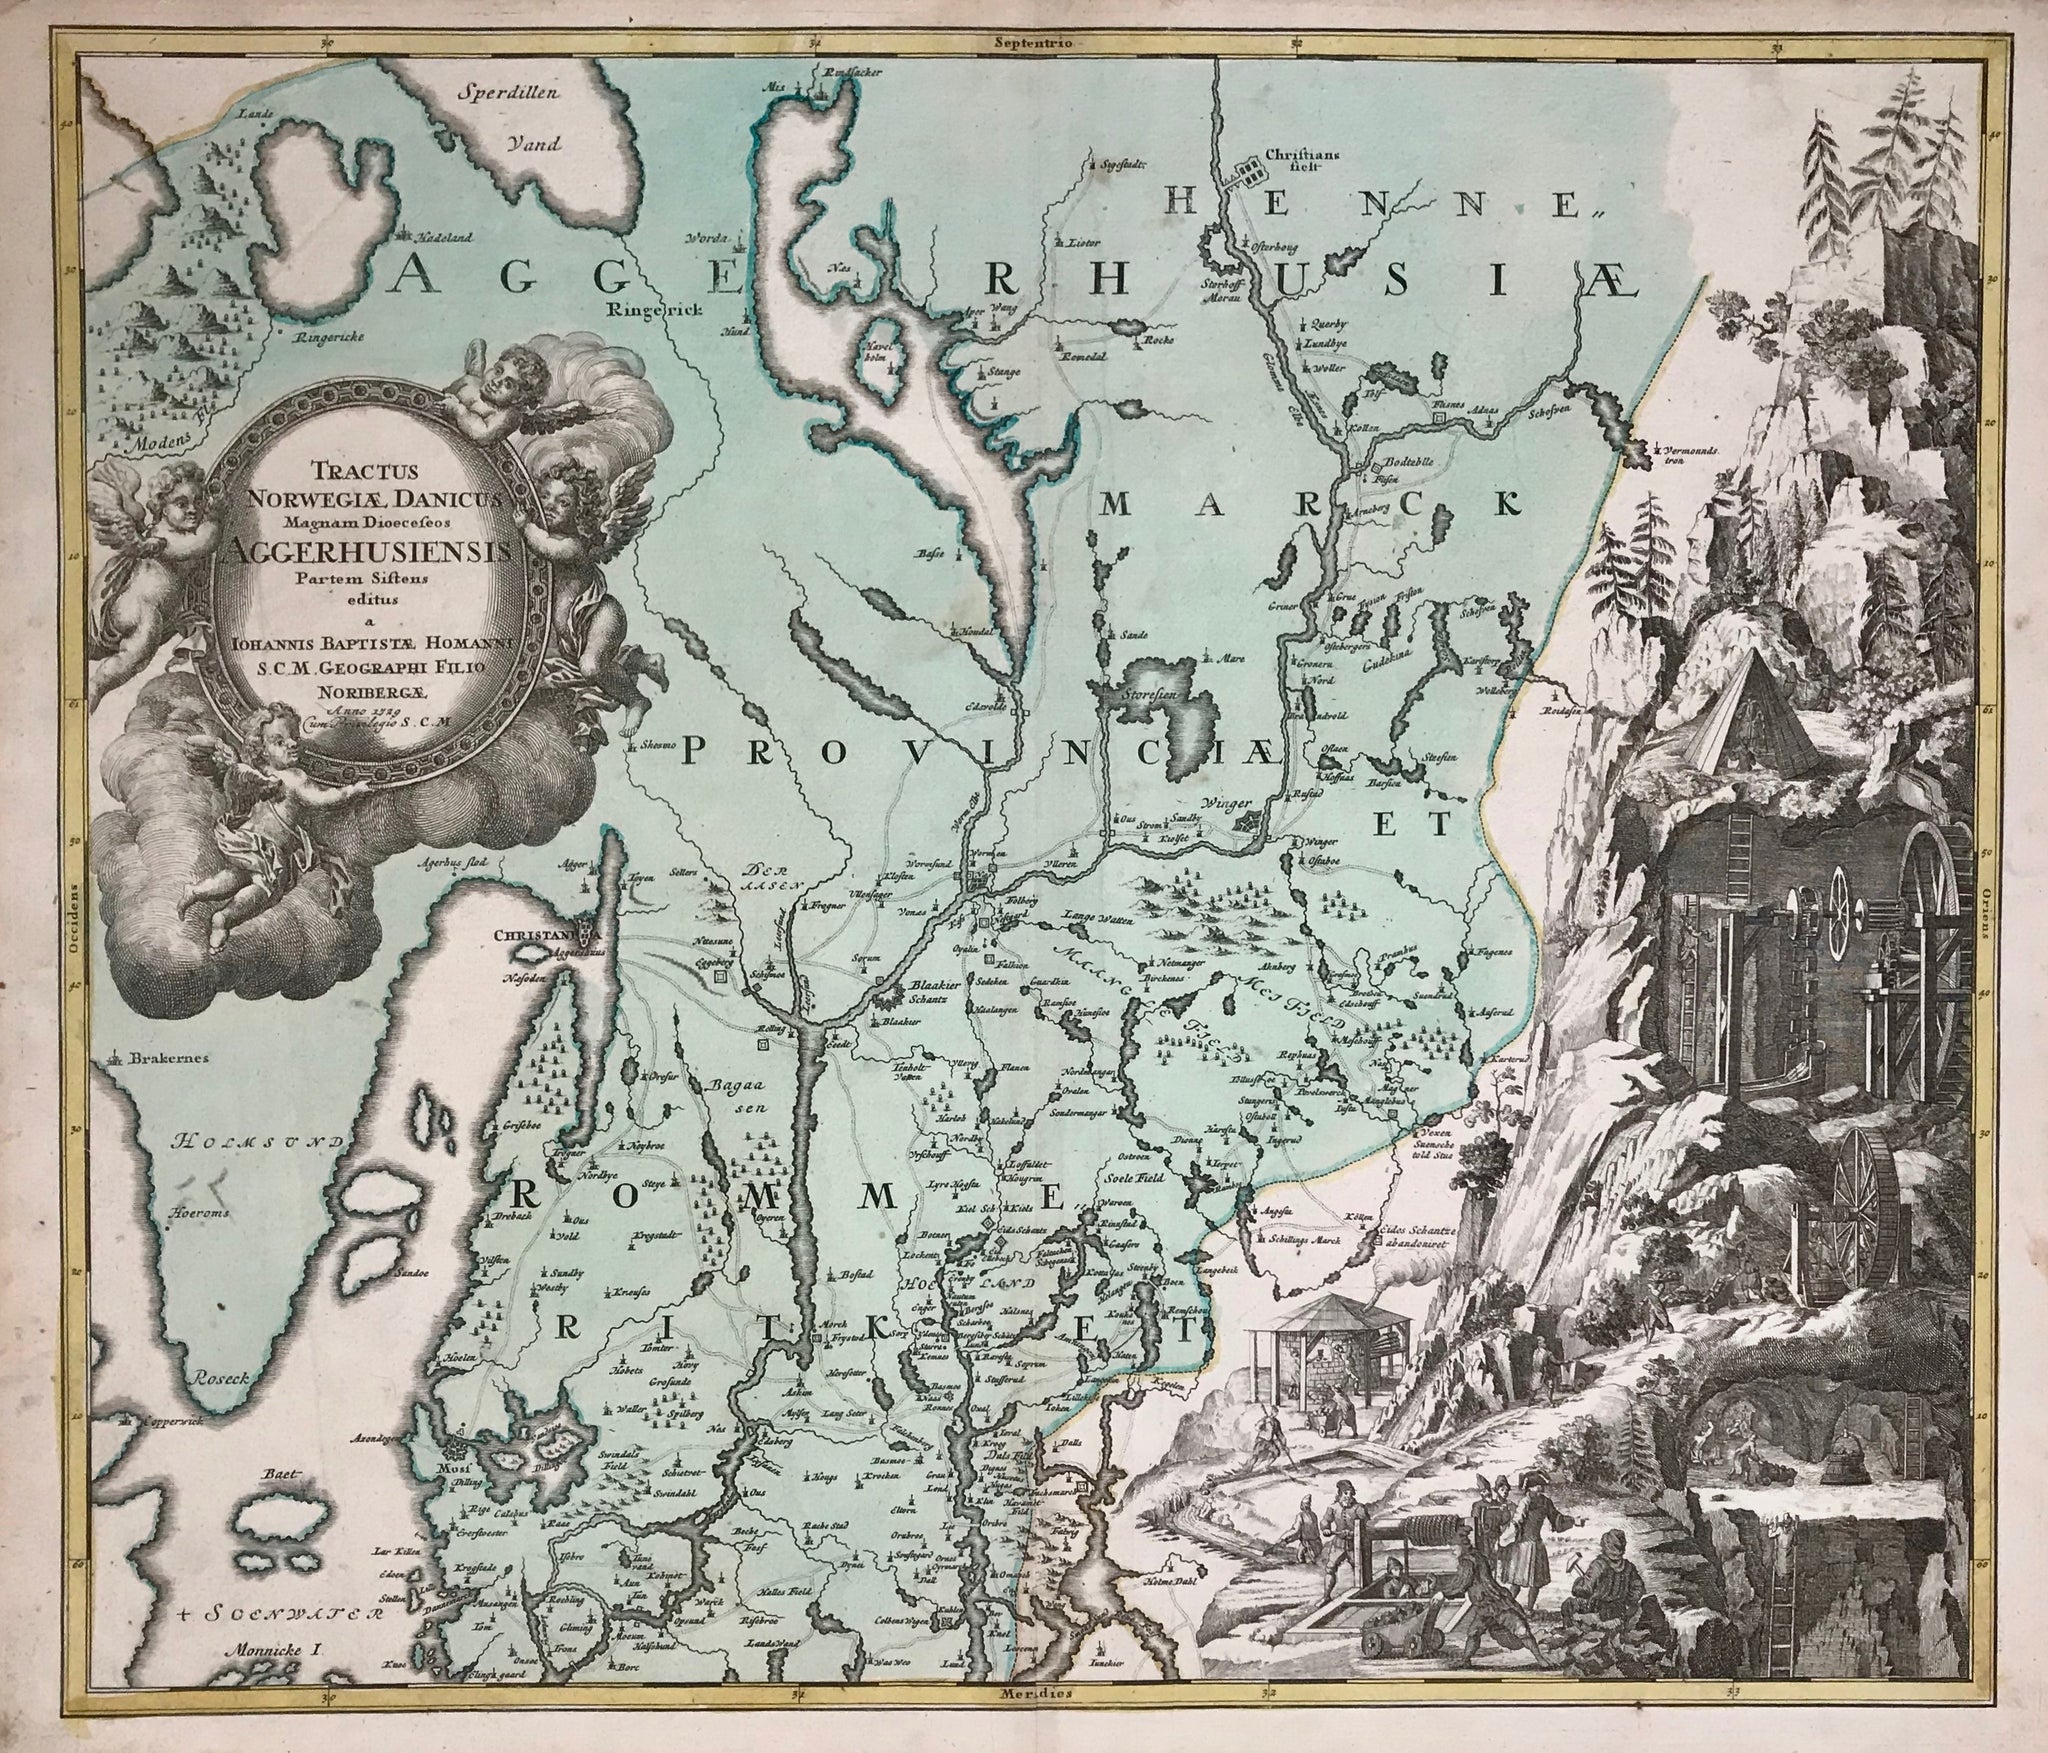 "Tractus Norwegiae Danicus Magnum Dioeceseos Aggerhusiensis Partem Siftens". Copper etching by Johann Baptist Homann and Son, dated 1729. Original hand coloring.  Cristania (Oslo) is locacted directly south of the title cartouche. In the upper left is Sperillen Land. South of Cristania is Moss and Monnicke Island. In the upper right is part of the Glomma River. On the right side are very lively scenes of Norwegian mining and smelting. There are some historical technical aspects of early mining shown.